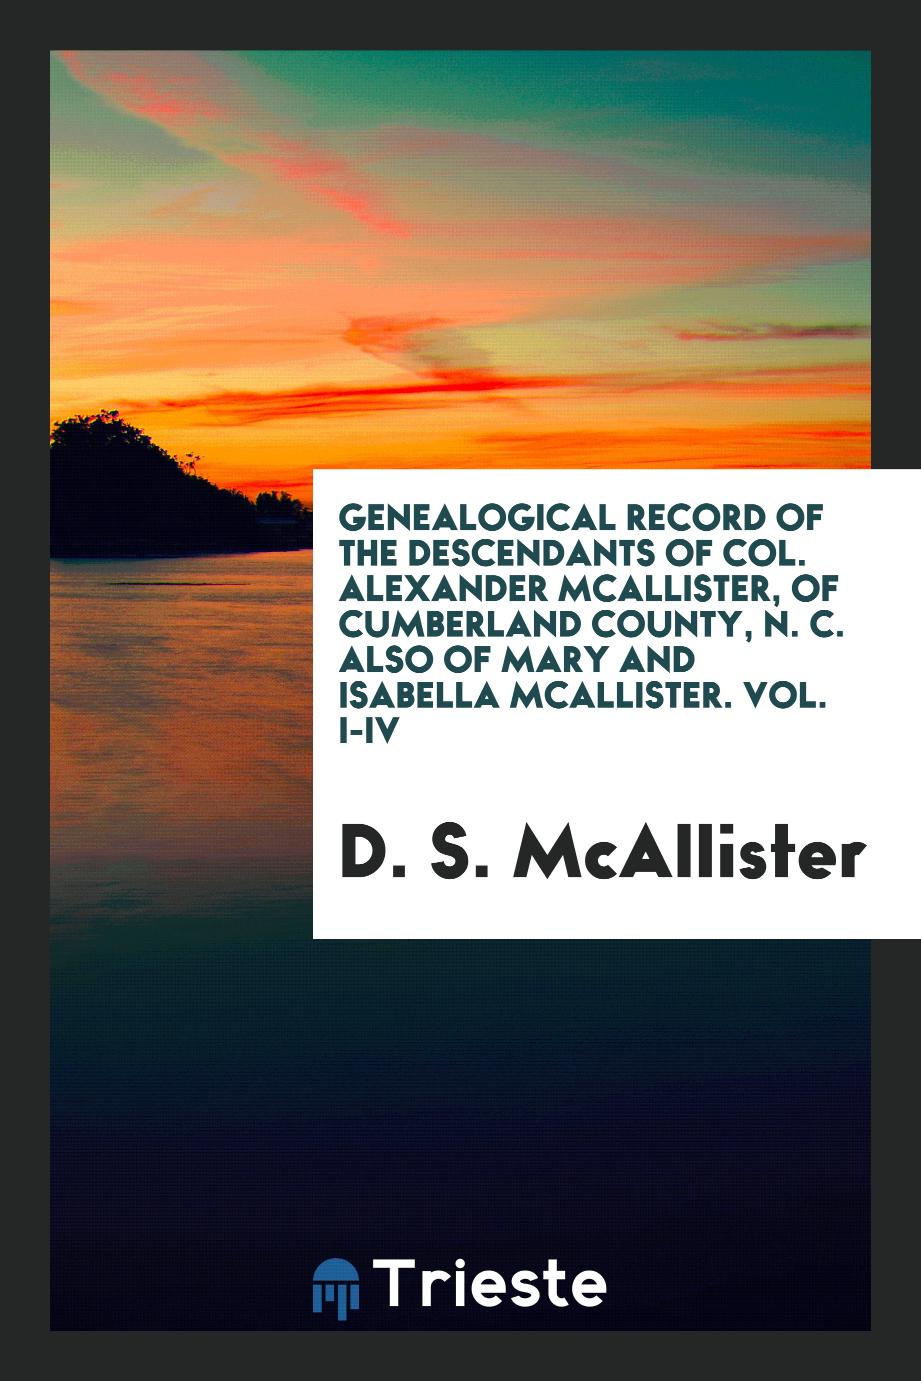 Genealogical Record of the Descendants of Col. Alexander McAllister, of Cumberland County, N. C. Also of Mary and Isabella McAllister. Vol. I-IV